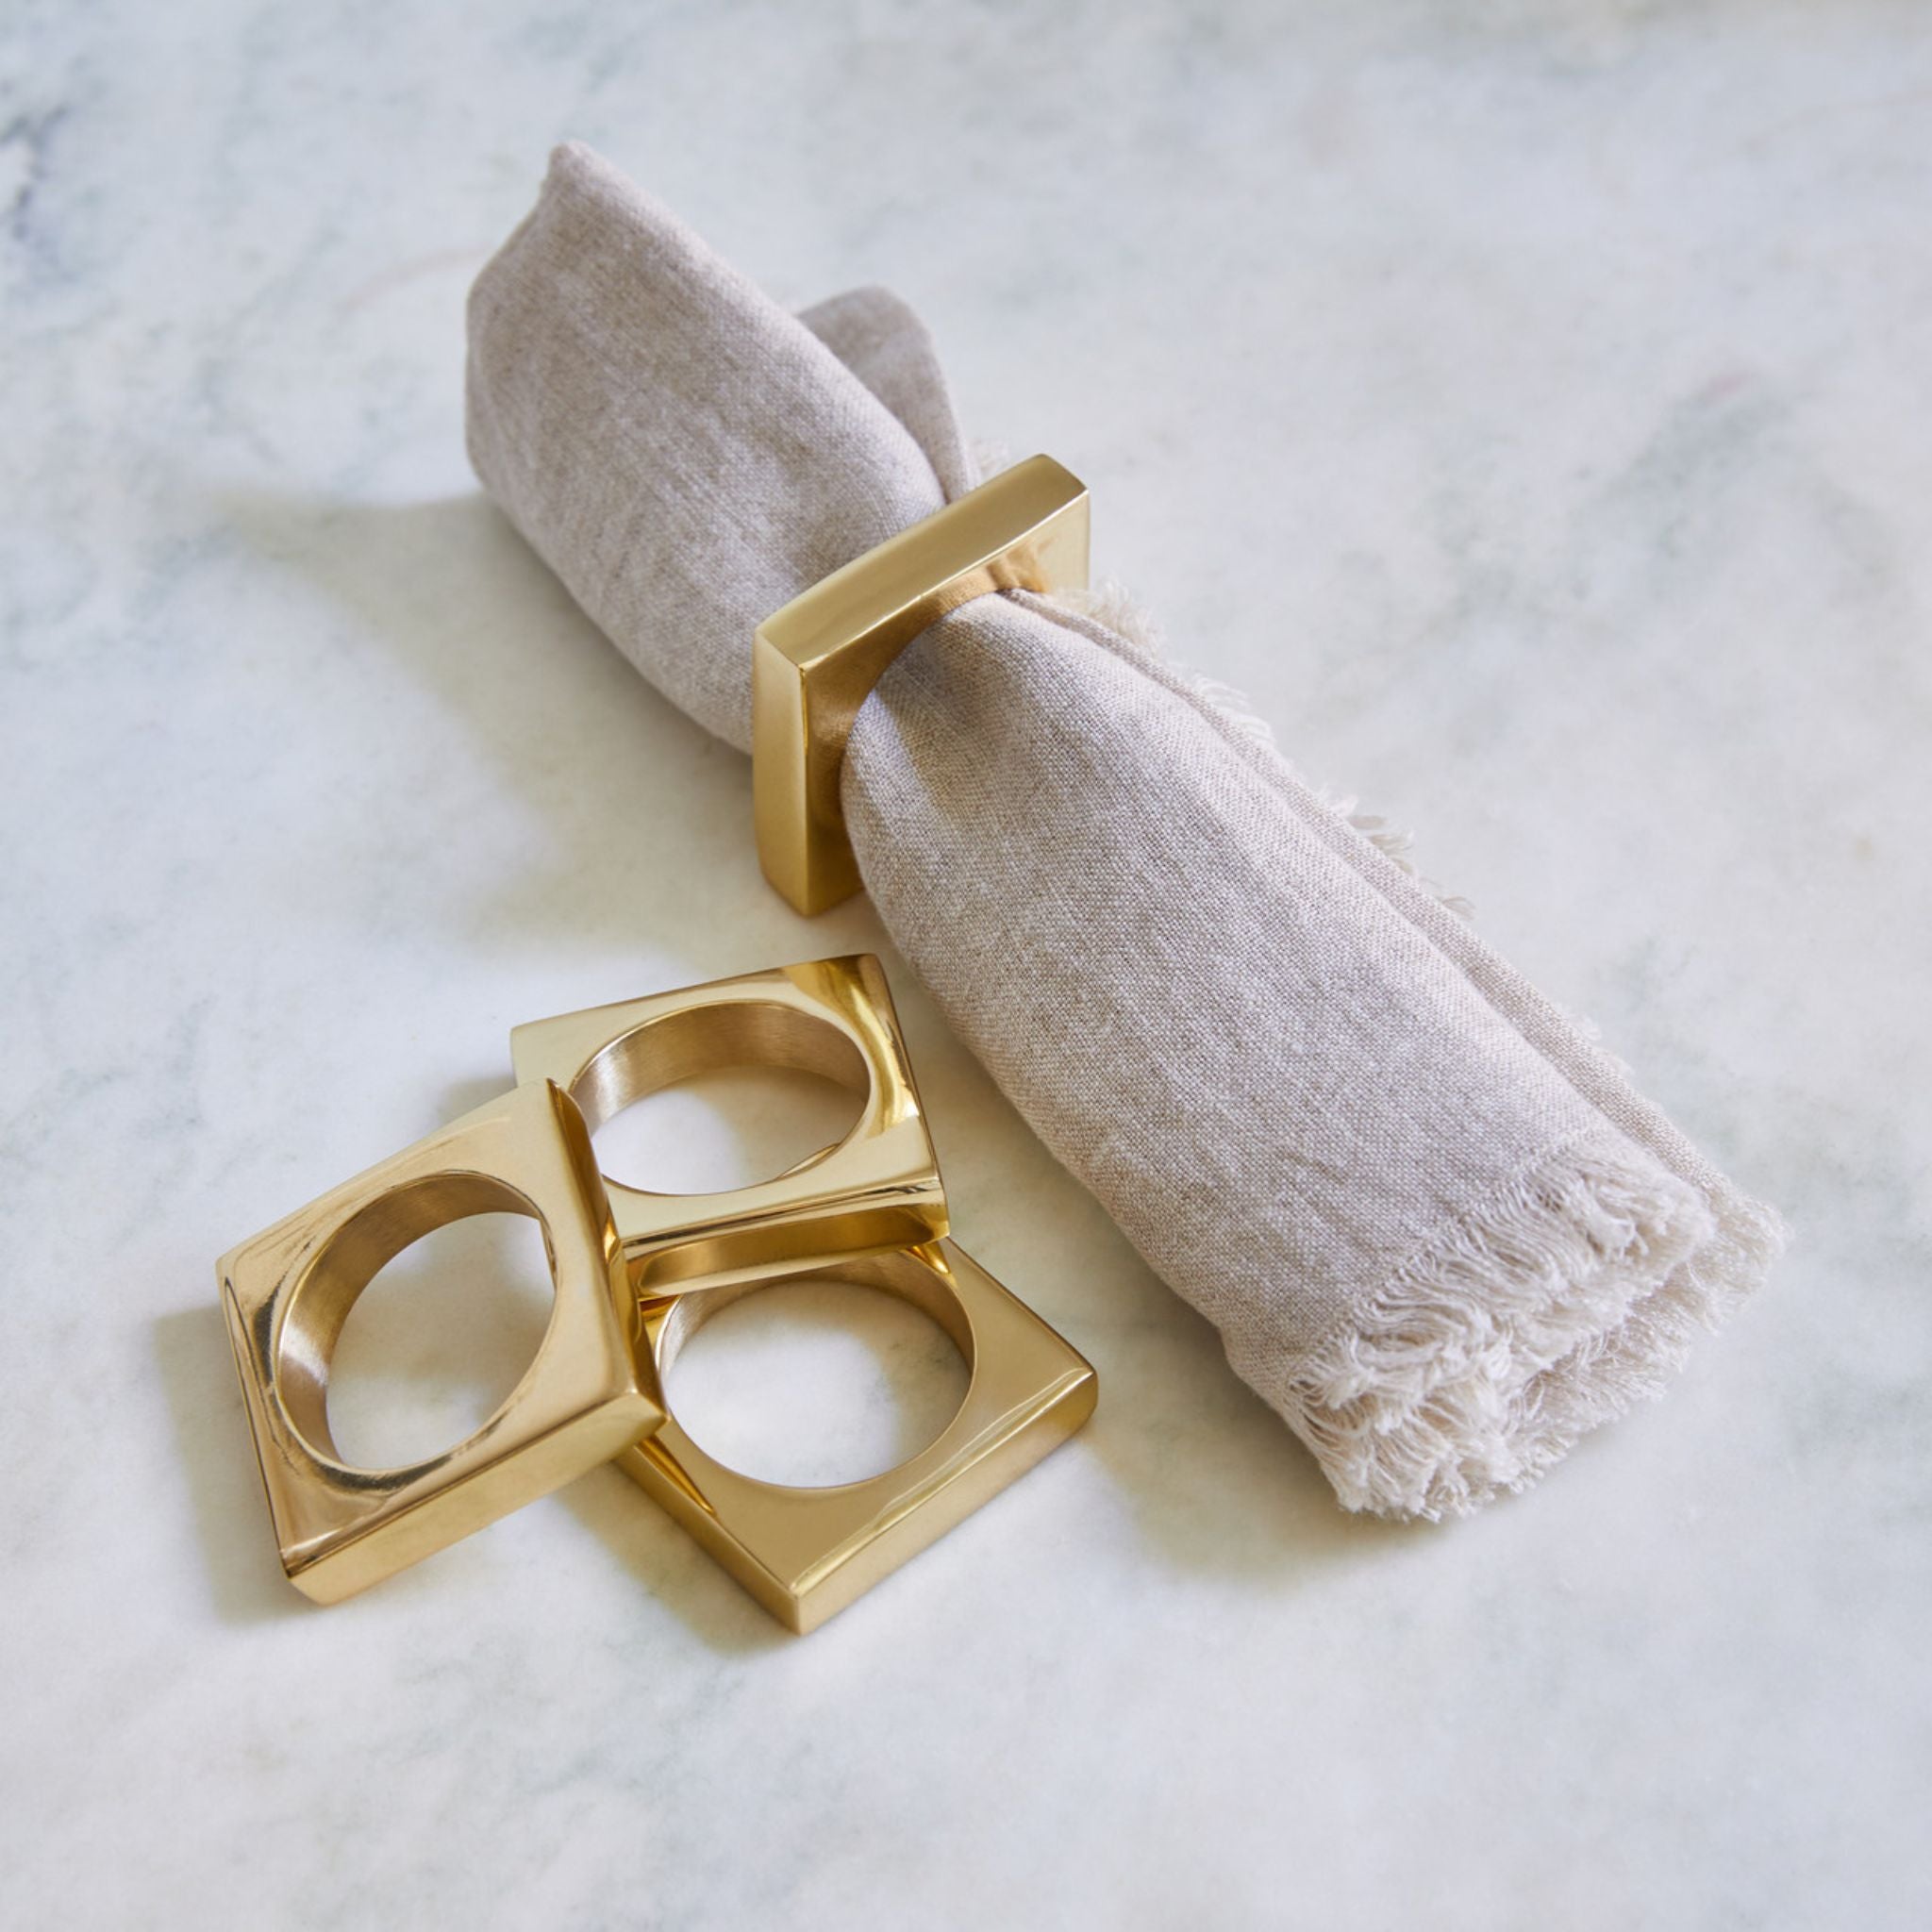 Simply Elevated - Brass Napkin Rings - A circle in a square, these weighty solid metal napkin rings embody geometric simplicity at its very best. Sold in pairs of two, they are available in either solid brass, or silver-plated brass.